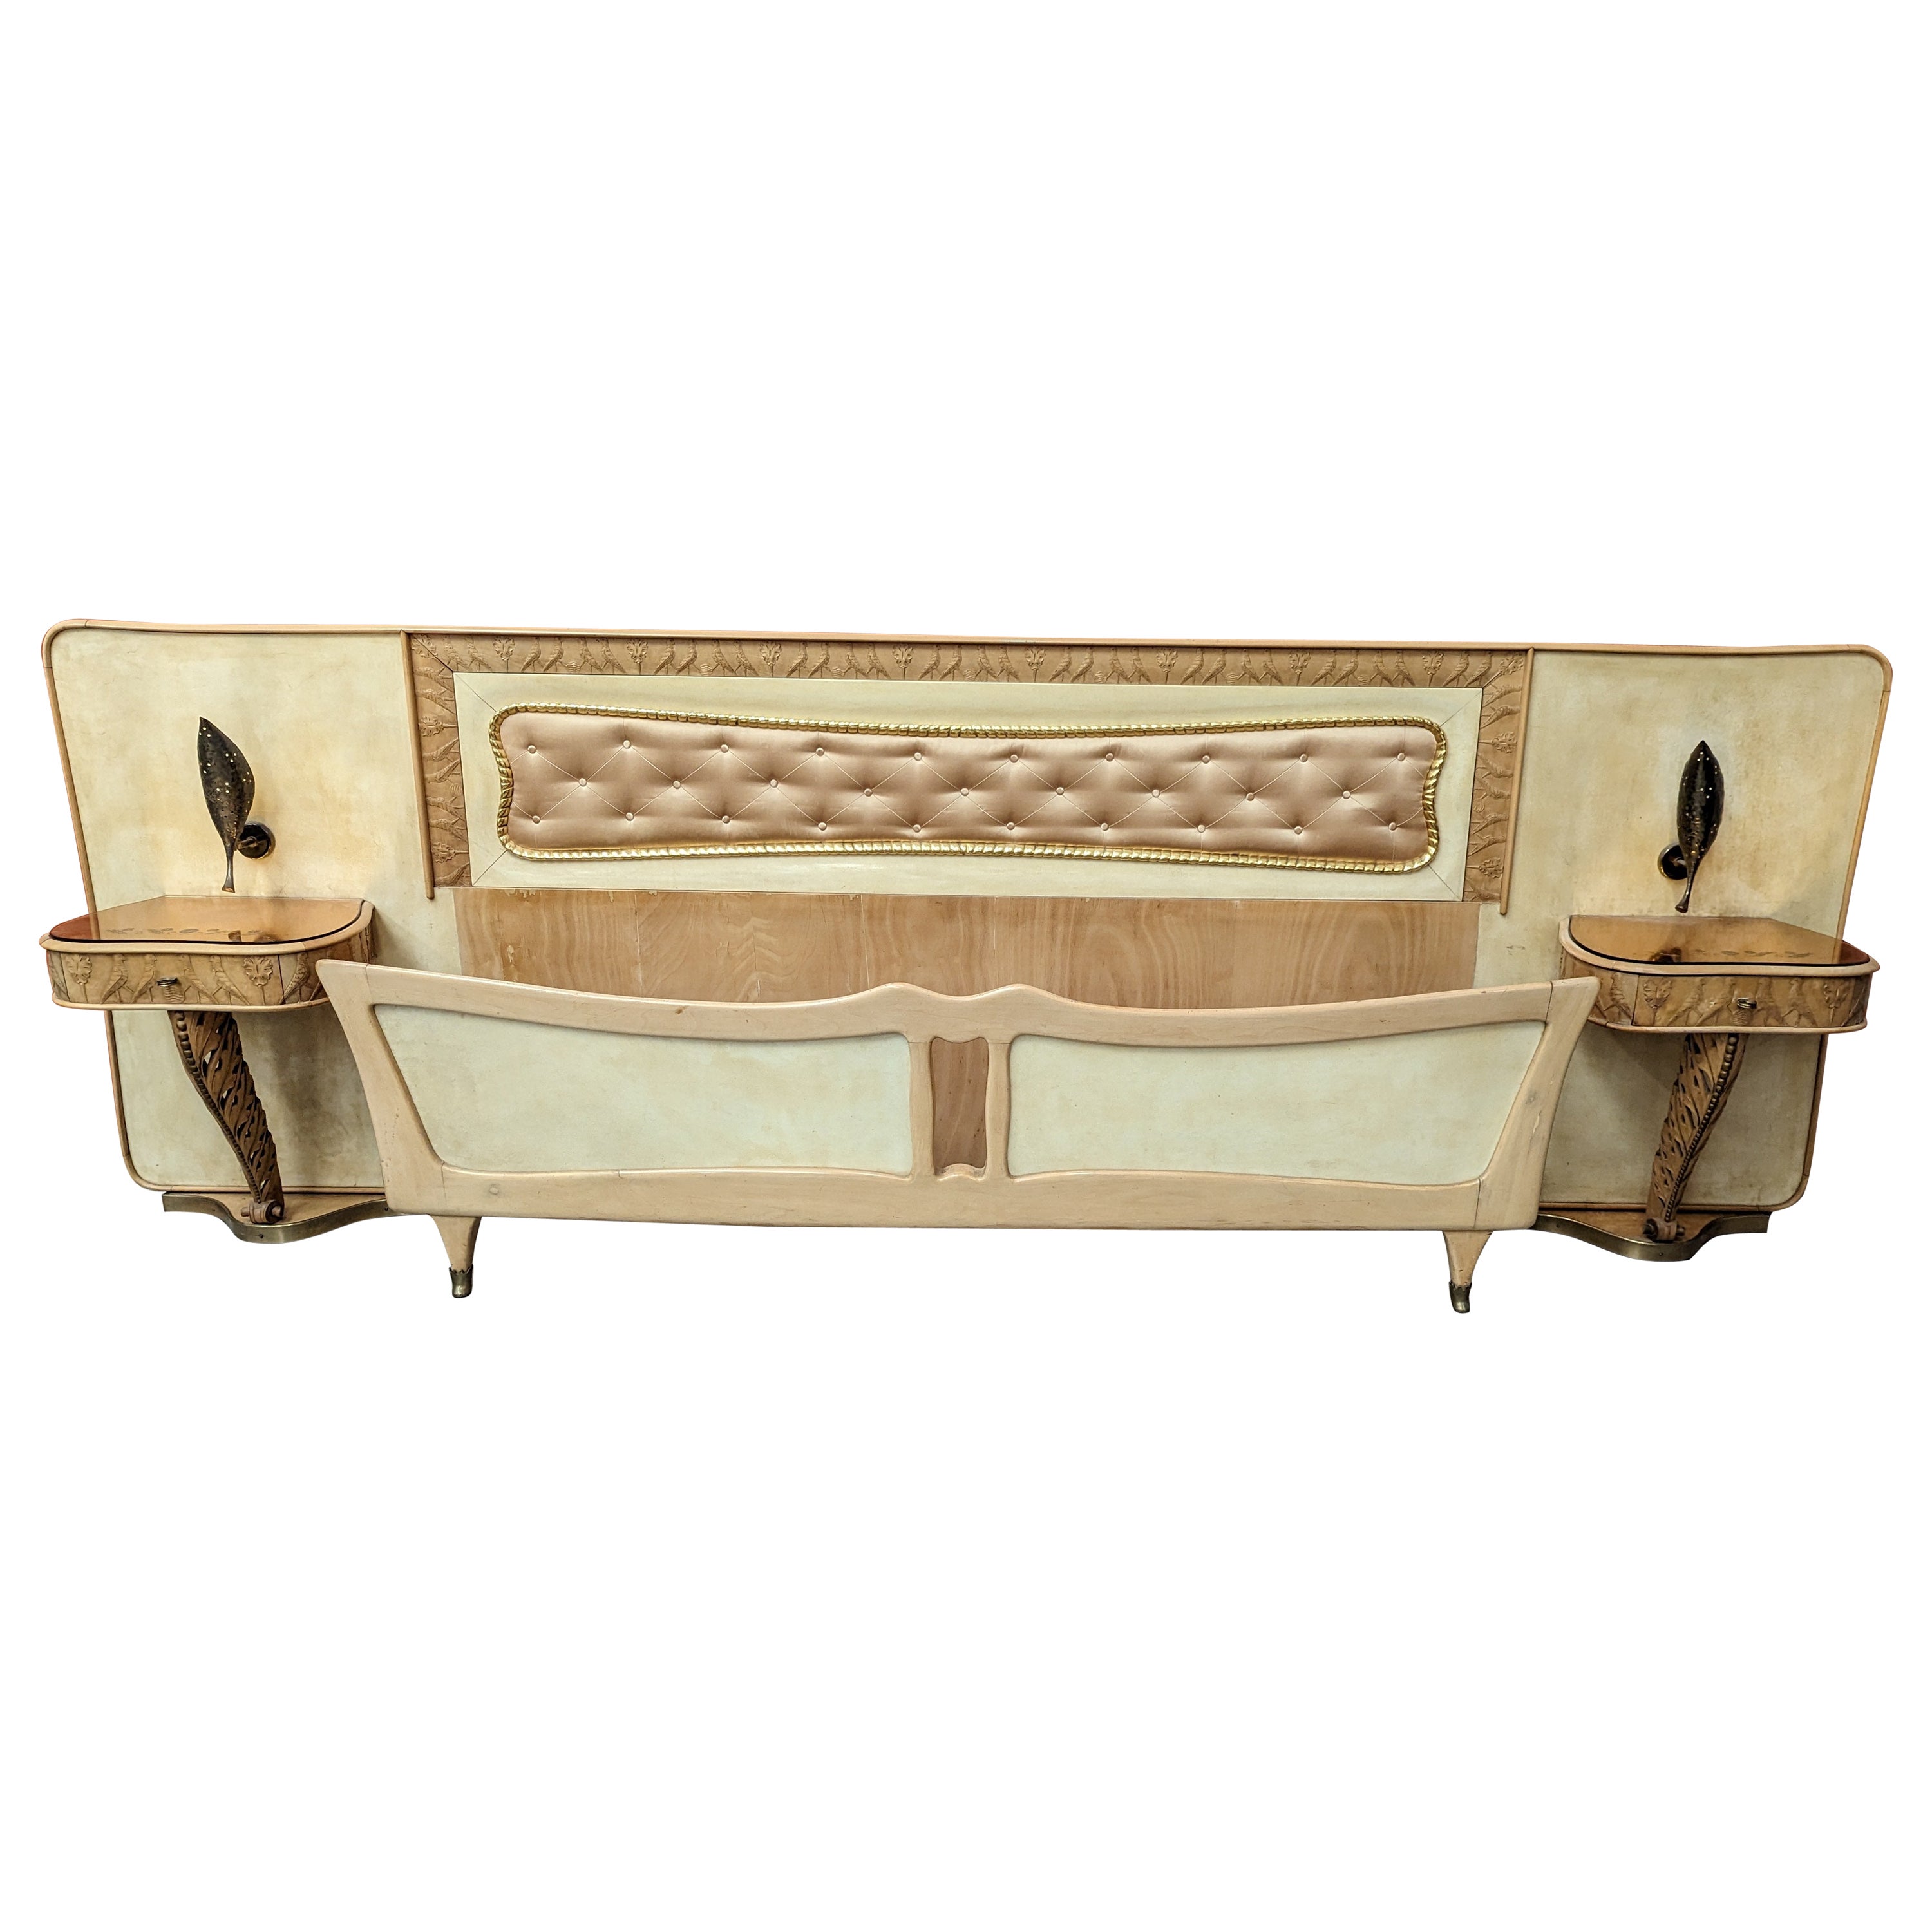 Italian Midcentury Bed with Night Stands in Parchment by Pierluigi Colli, 1950s For Sale